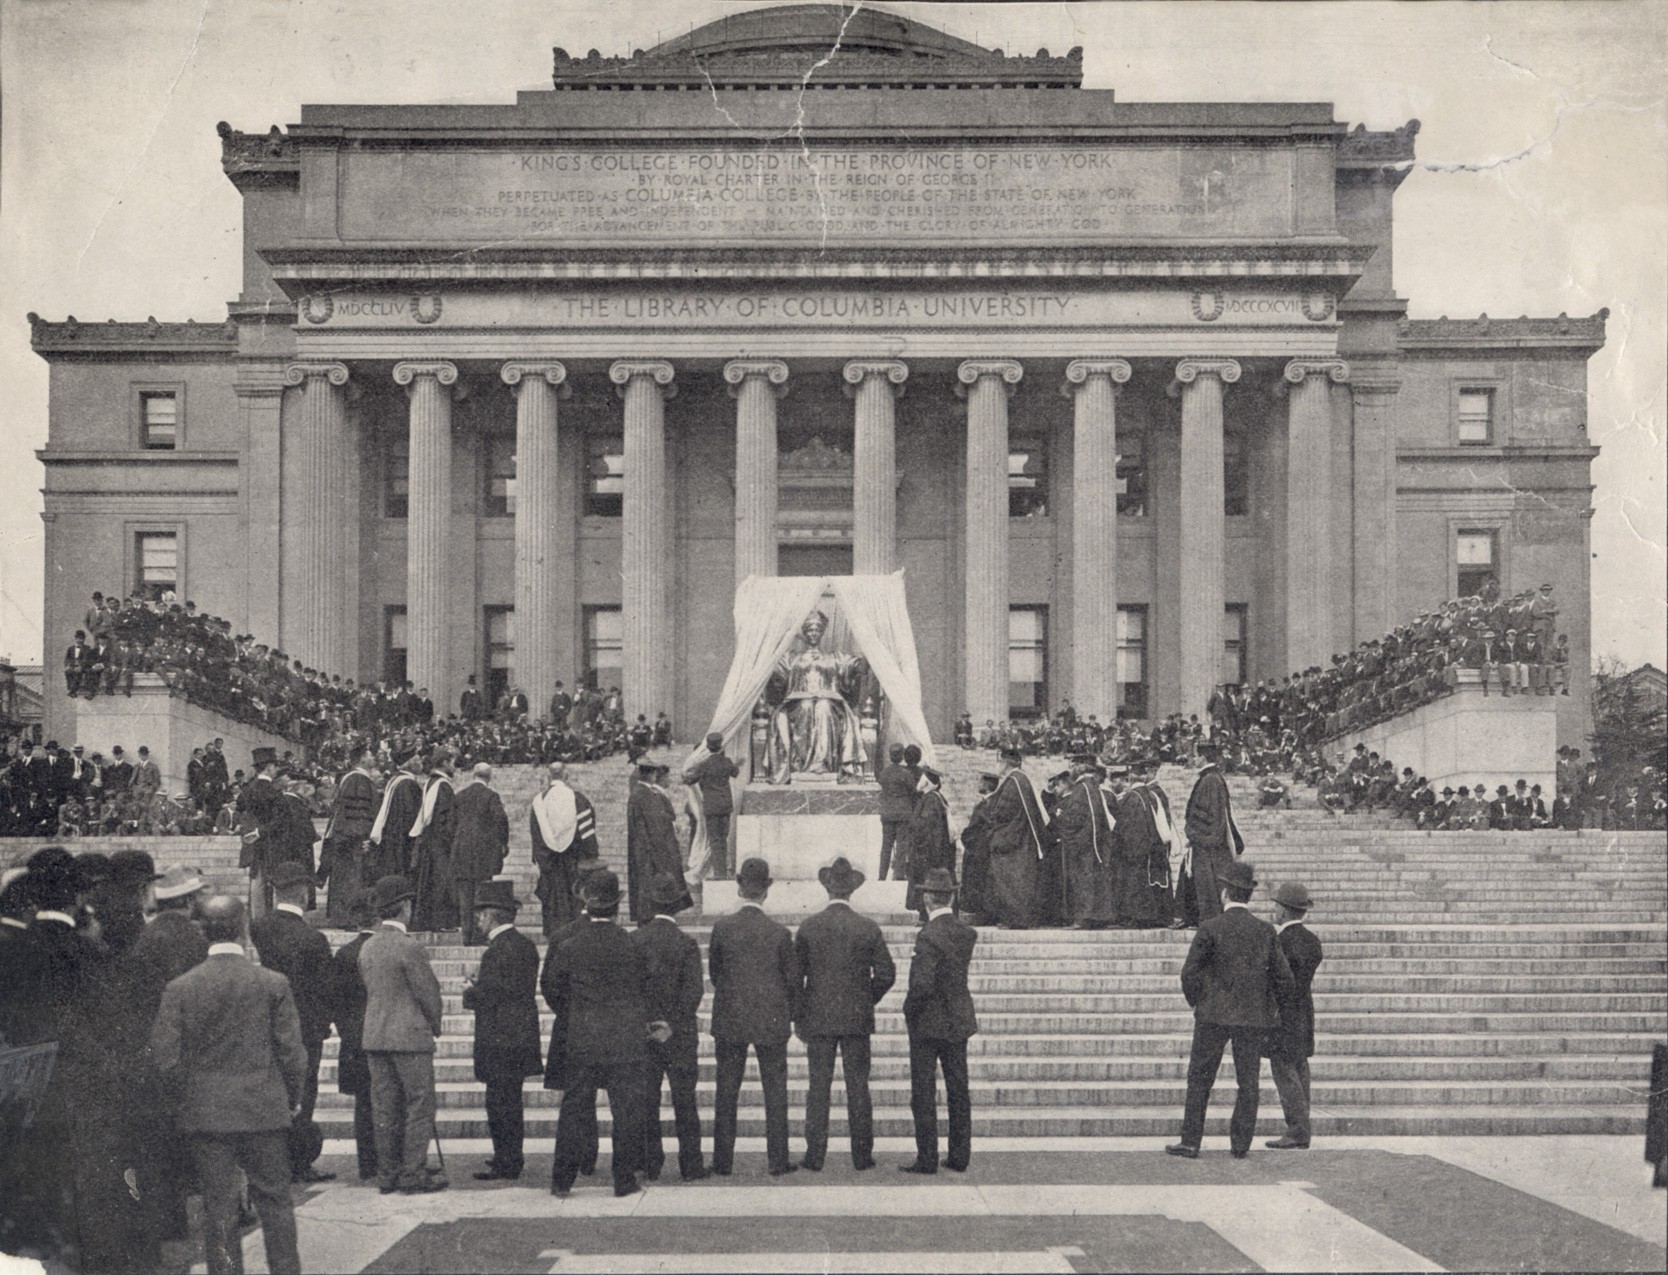 The inauguration of Daniel Chester French’s Alma Mater as a Memorial for Robert Goelet, Jr. (Class of 1860) on September 23, 1903. Photo courtesy of Columbia University Archives.